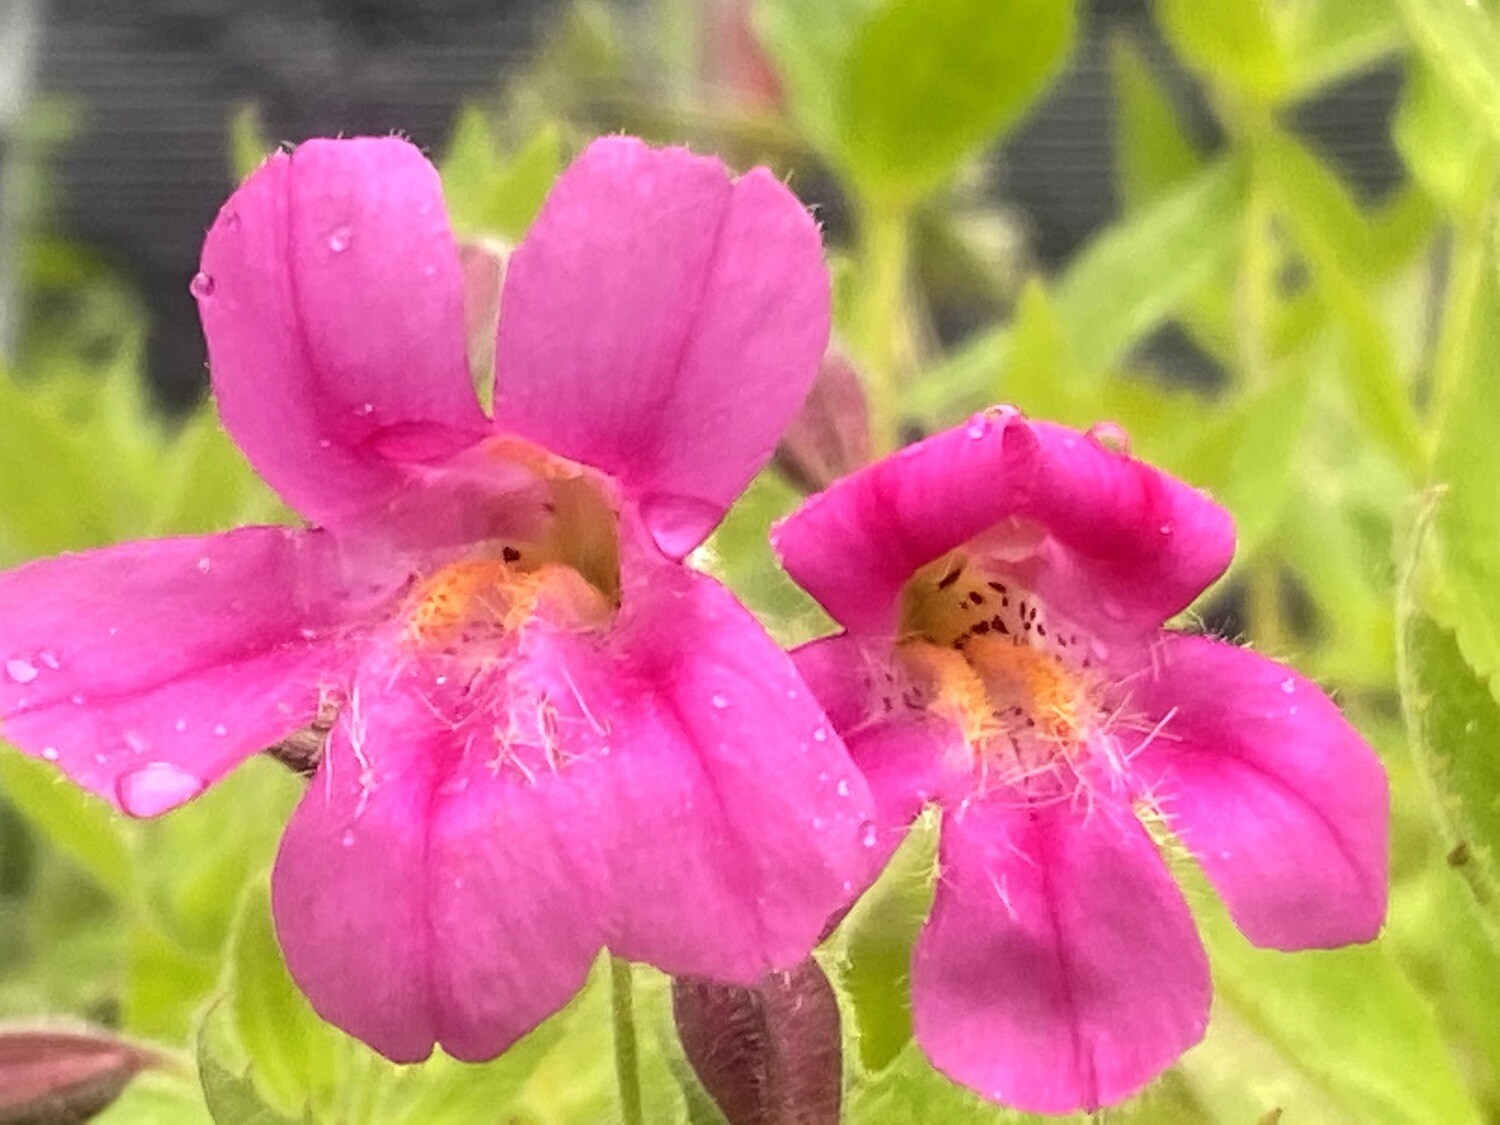 Erythranthe (Mimulus) lewisii - Great Purple Monkey Flower, Container Size: 1 Gallon